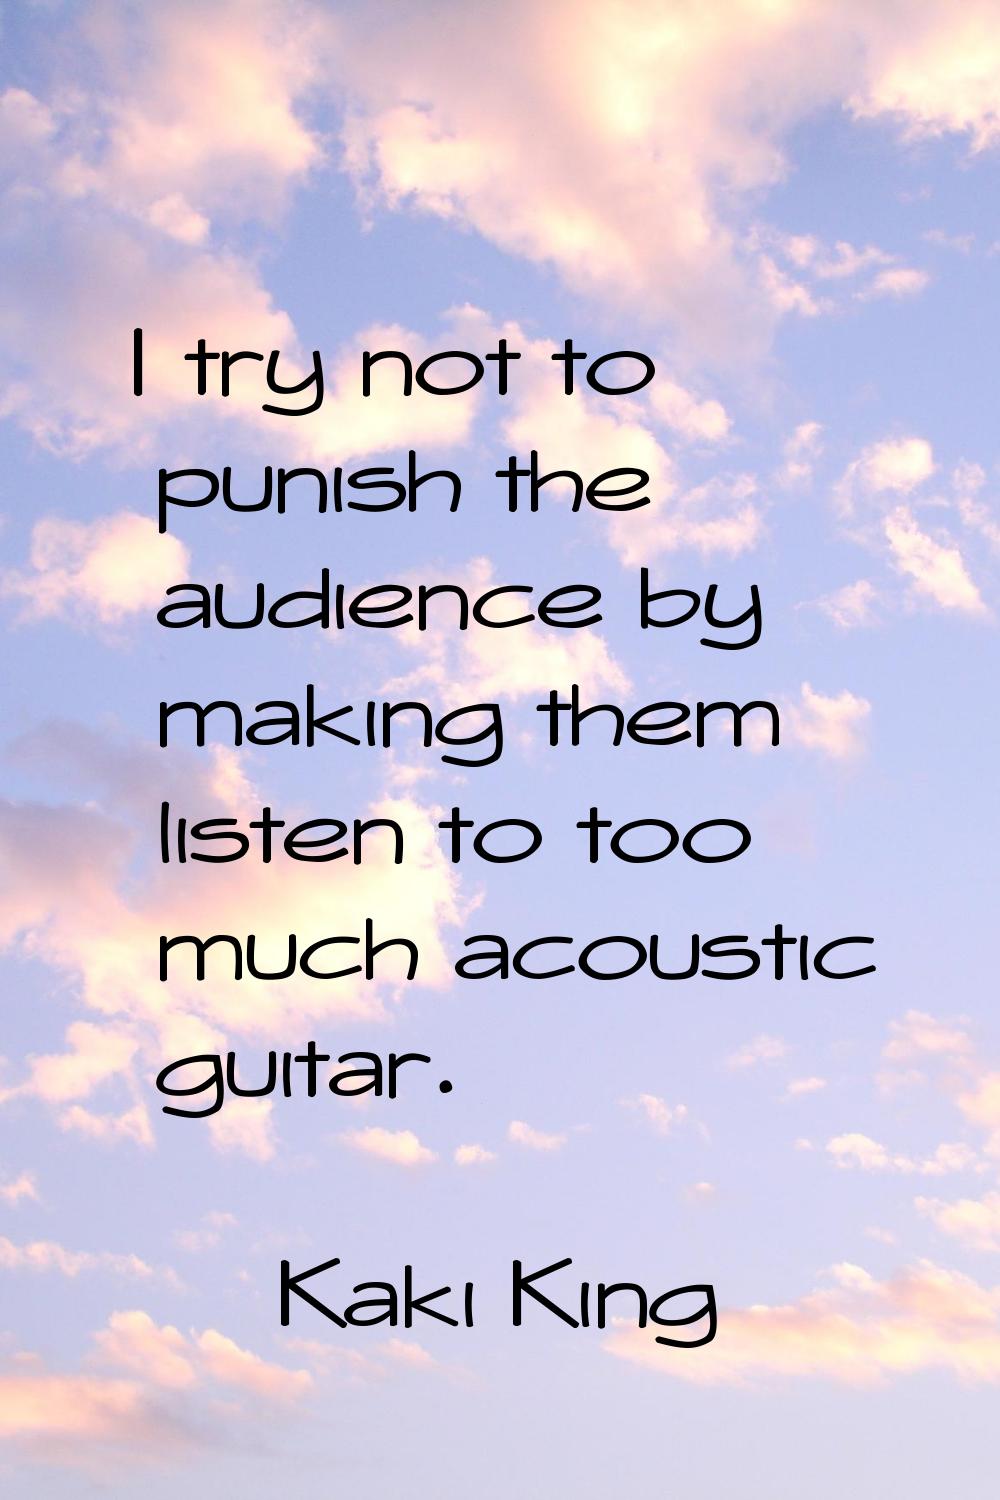 I try not to punish the audience by making them listen to too much acoustic guitar.